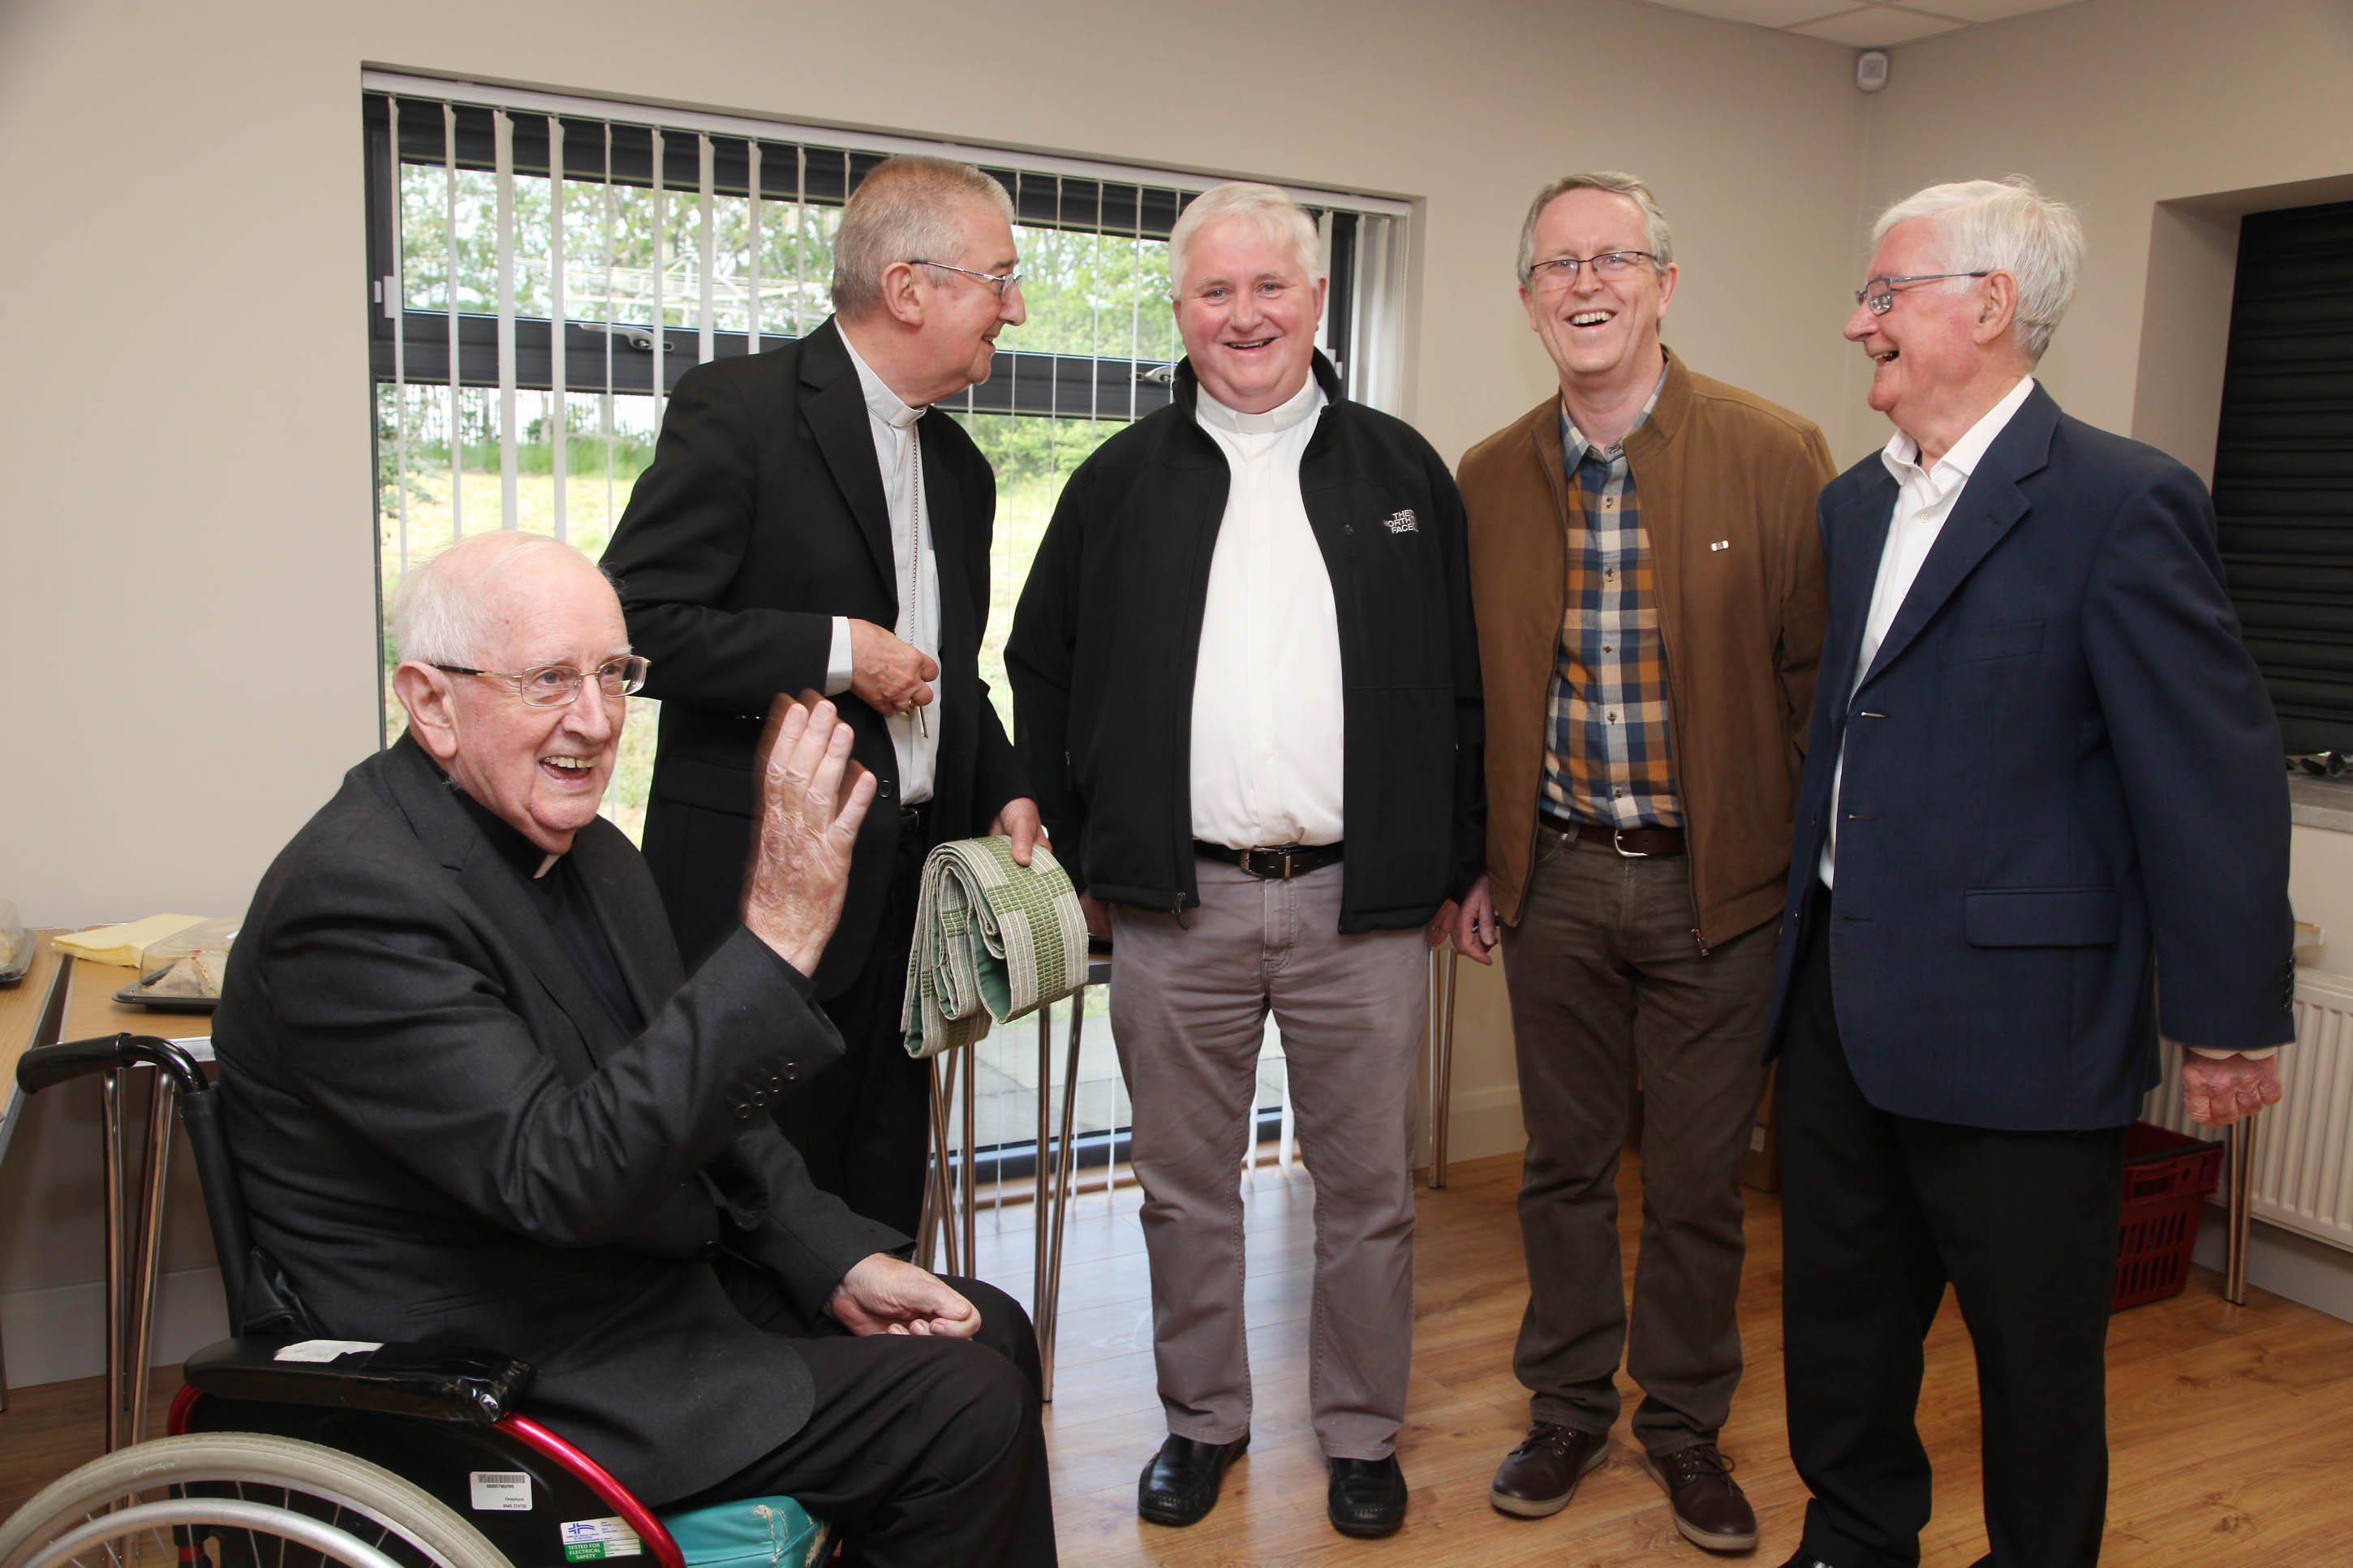 Former Columban rectory in Ballymun transformed into a pastoral centre